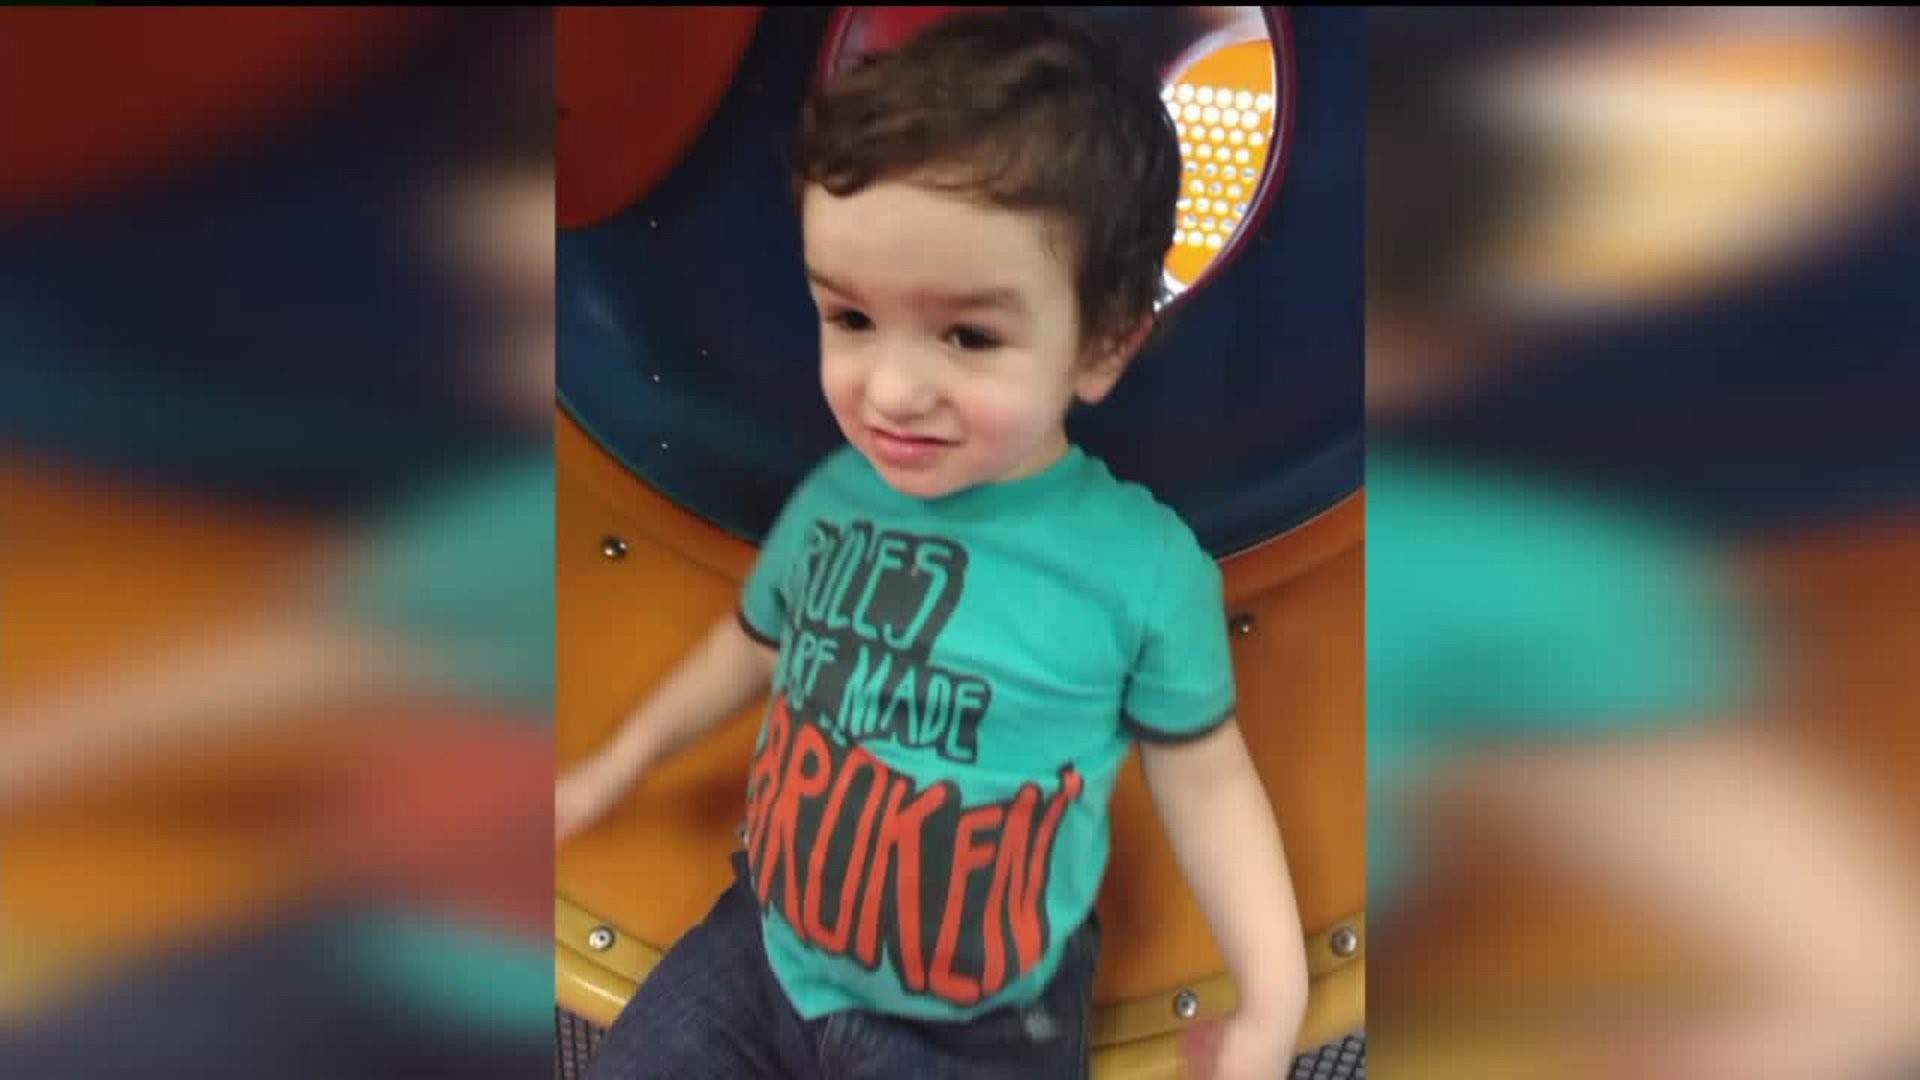 Fundraiser to Help 3-Year-Old Fire Victim